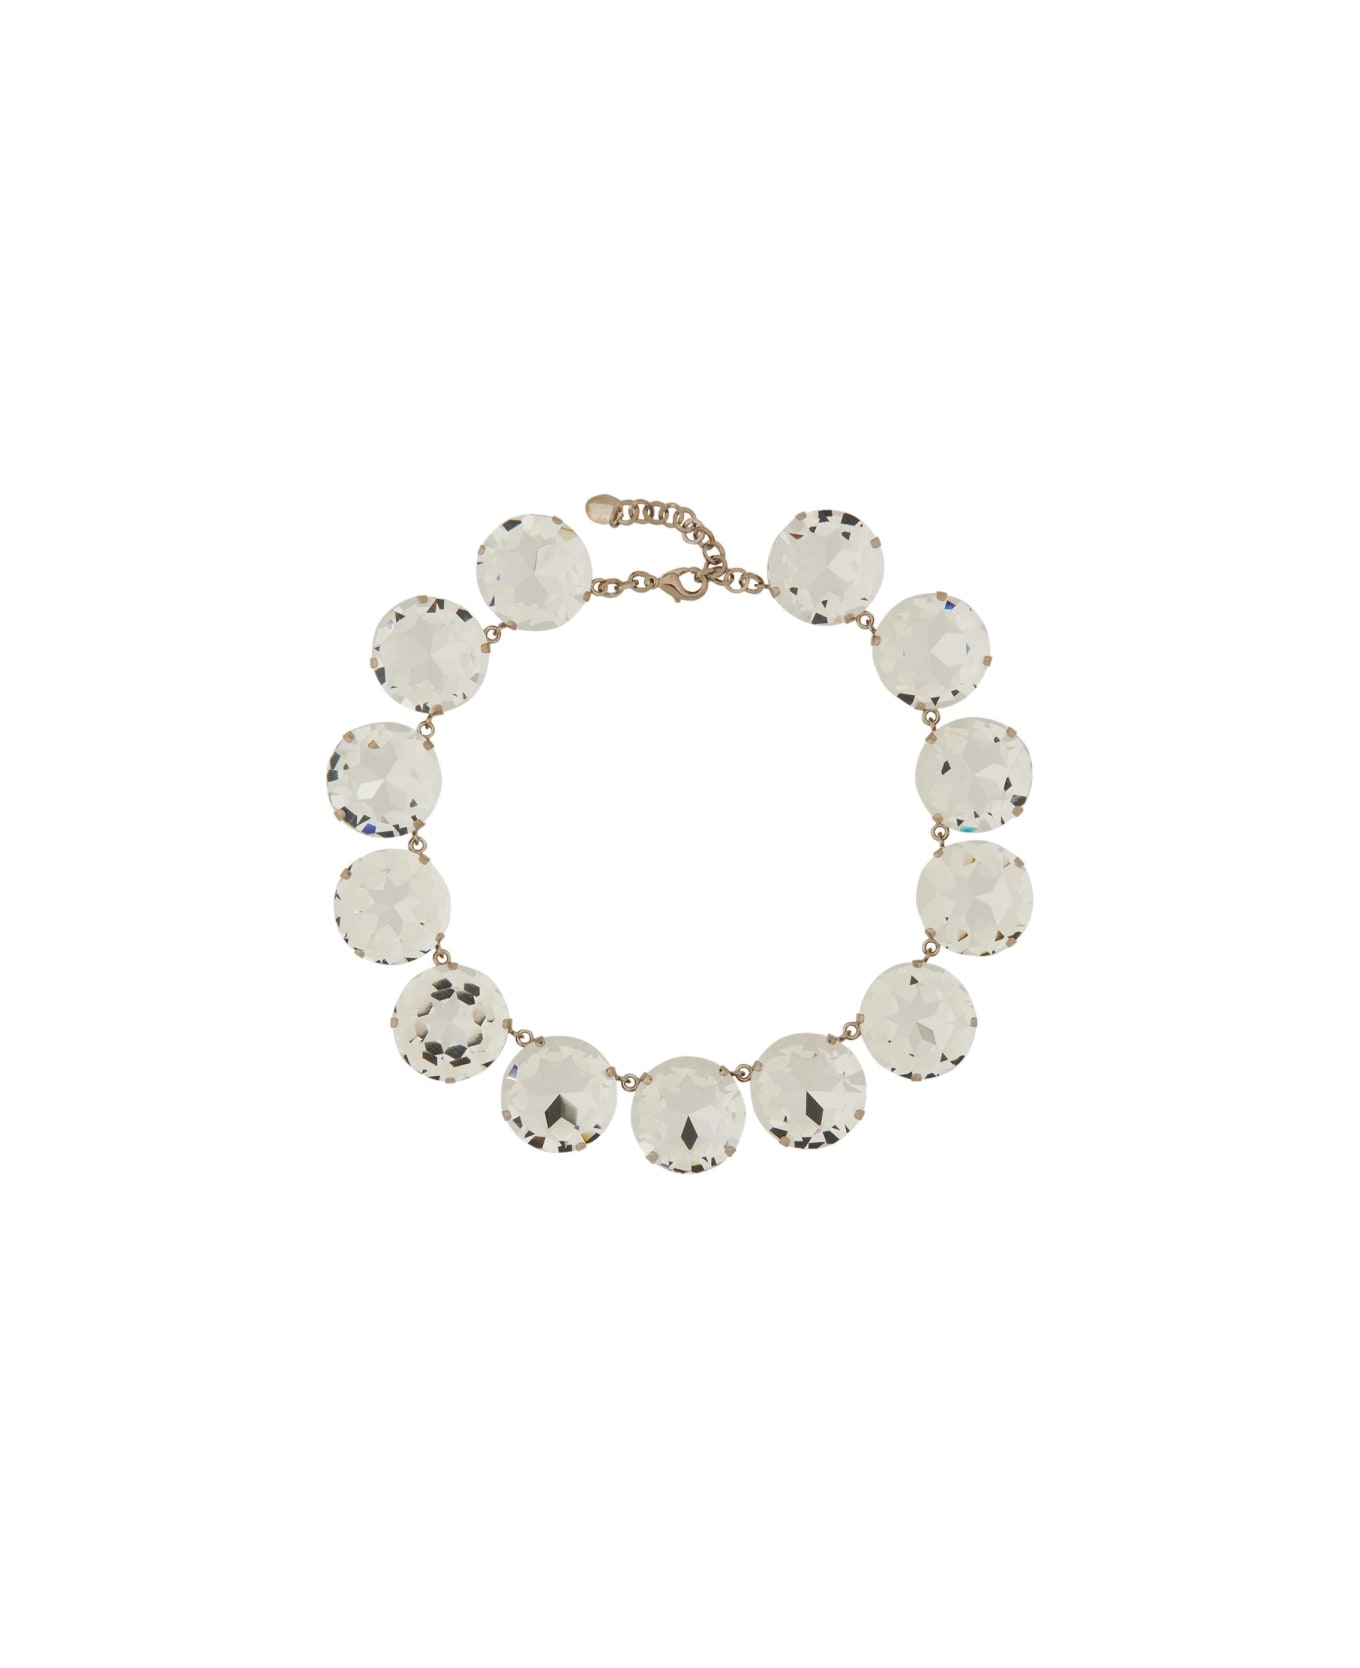 Moschino Rhinestone Necklace - SILVER ネックレス